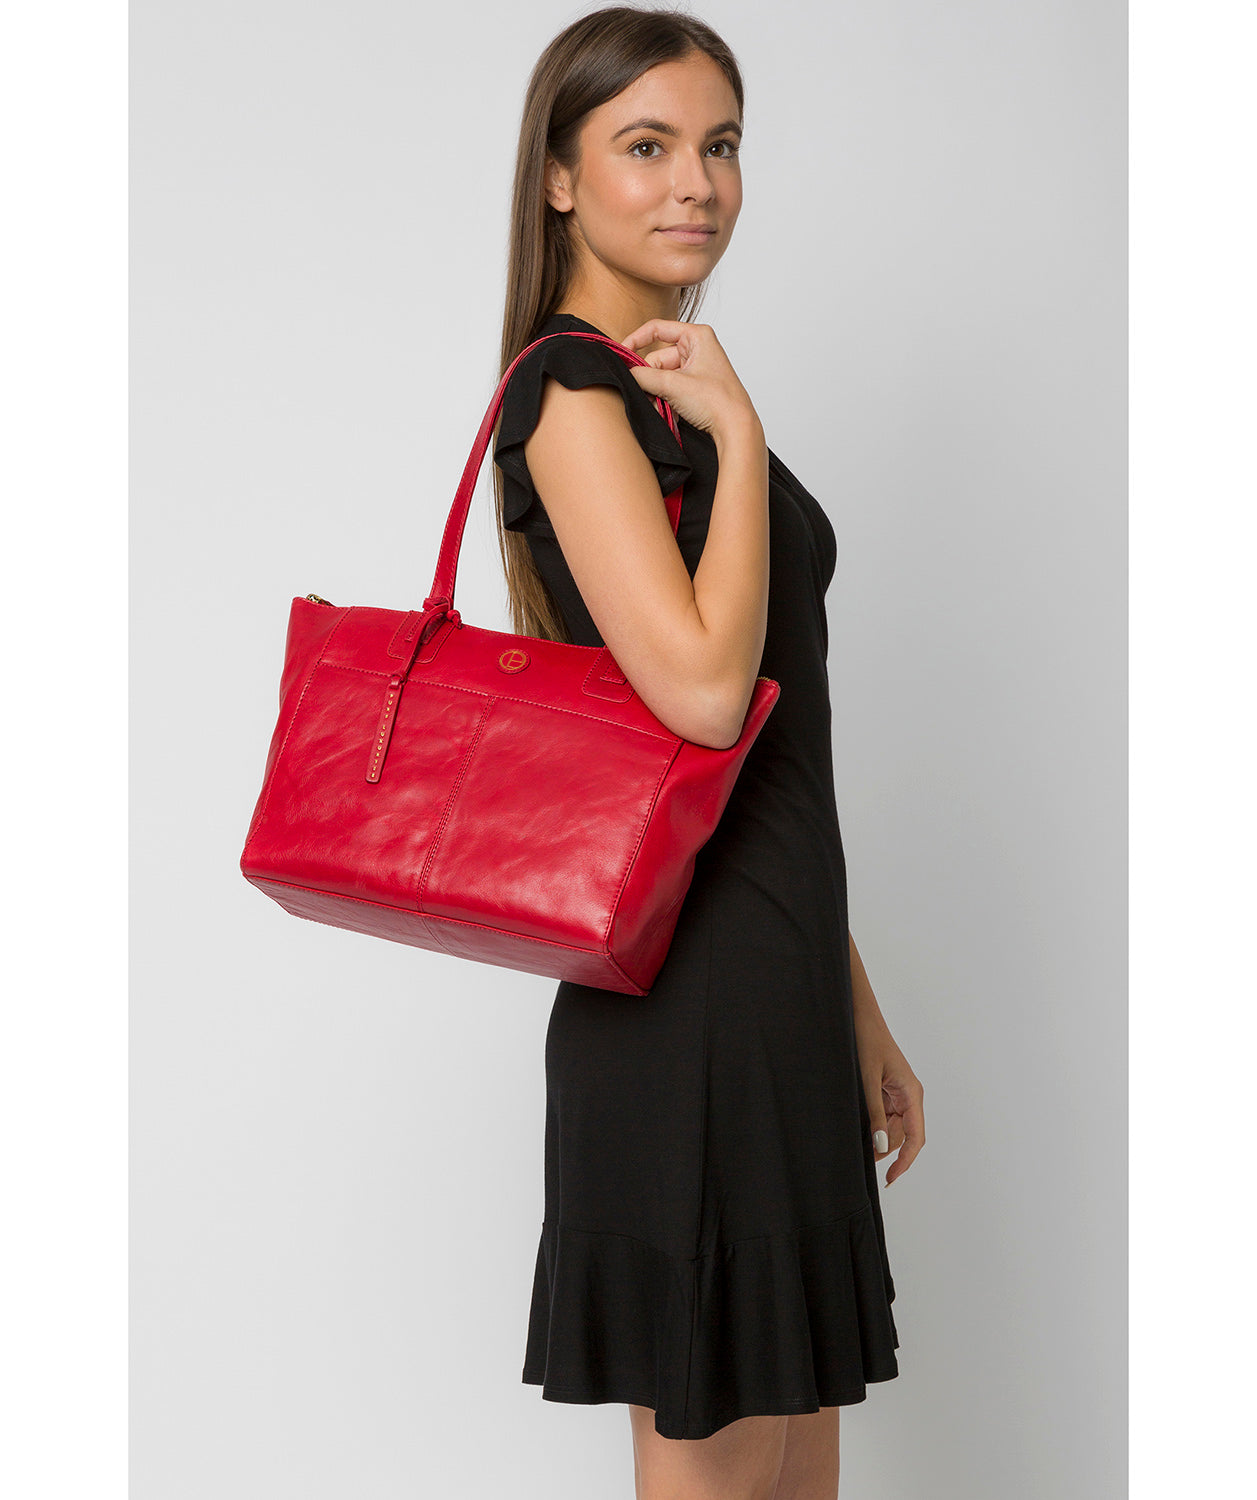 Red Leather Tote Bag 'Gwent' by Pure Luxuries – Pure Luxuries London